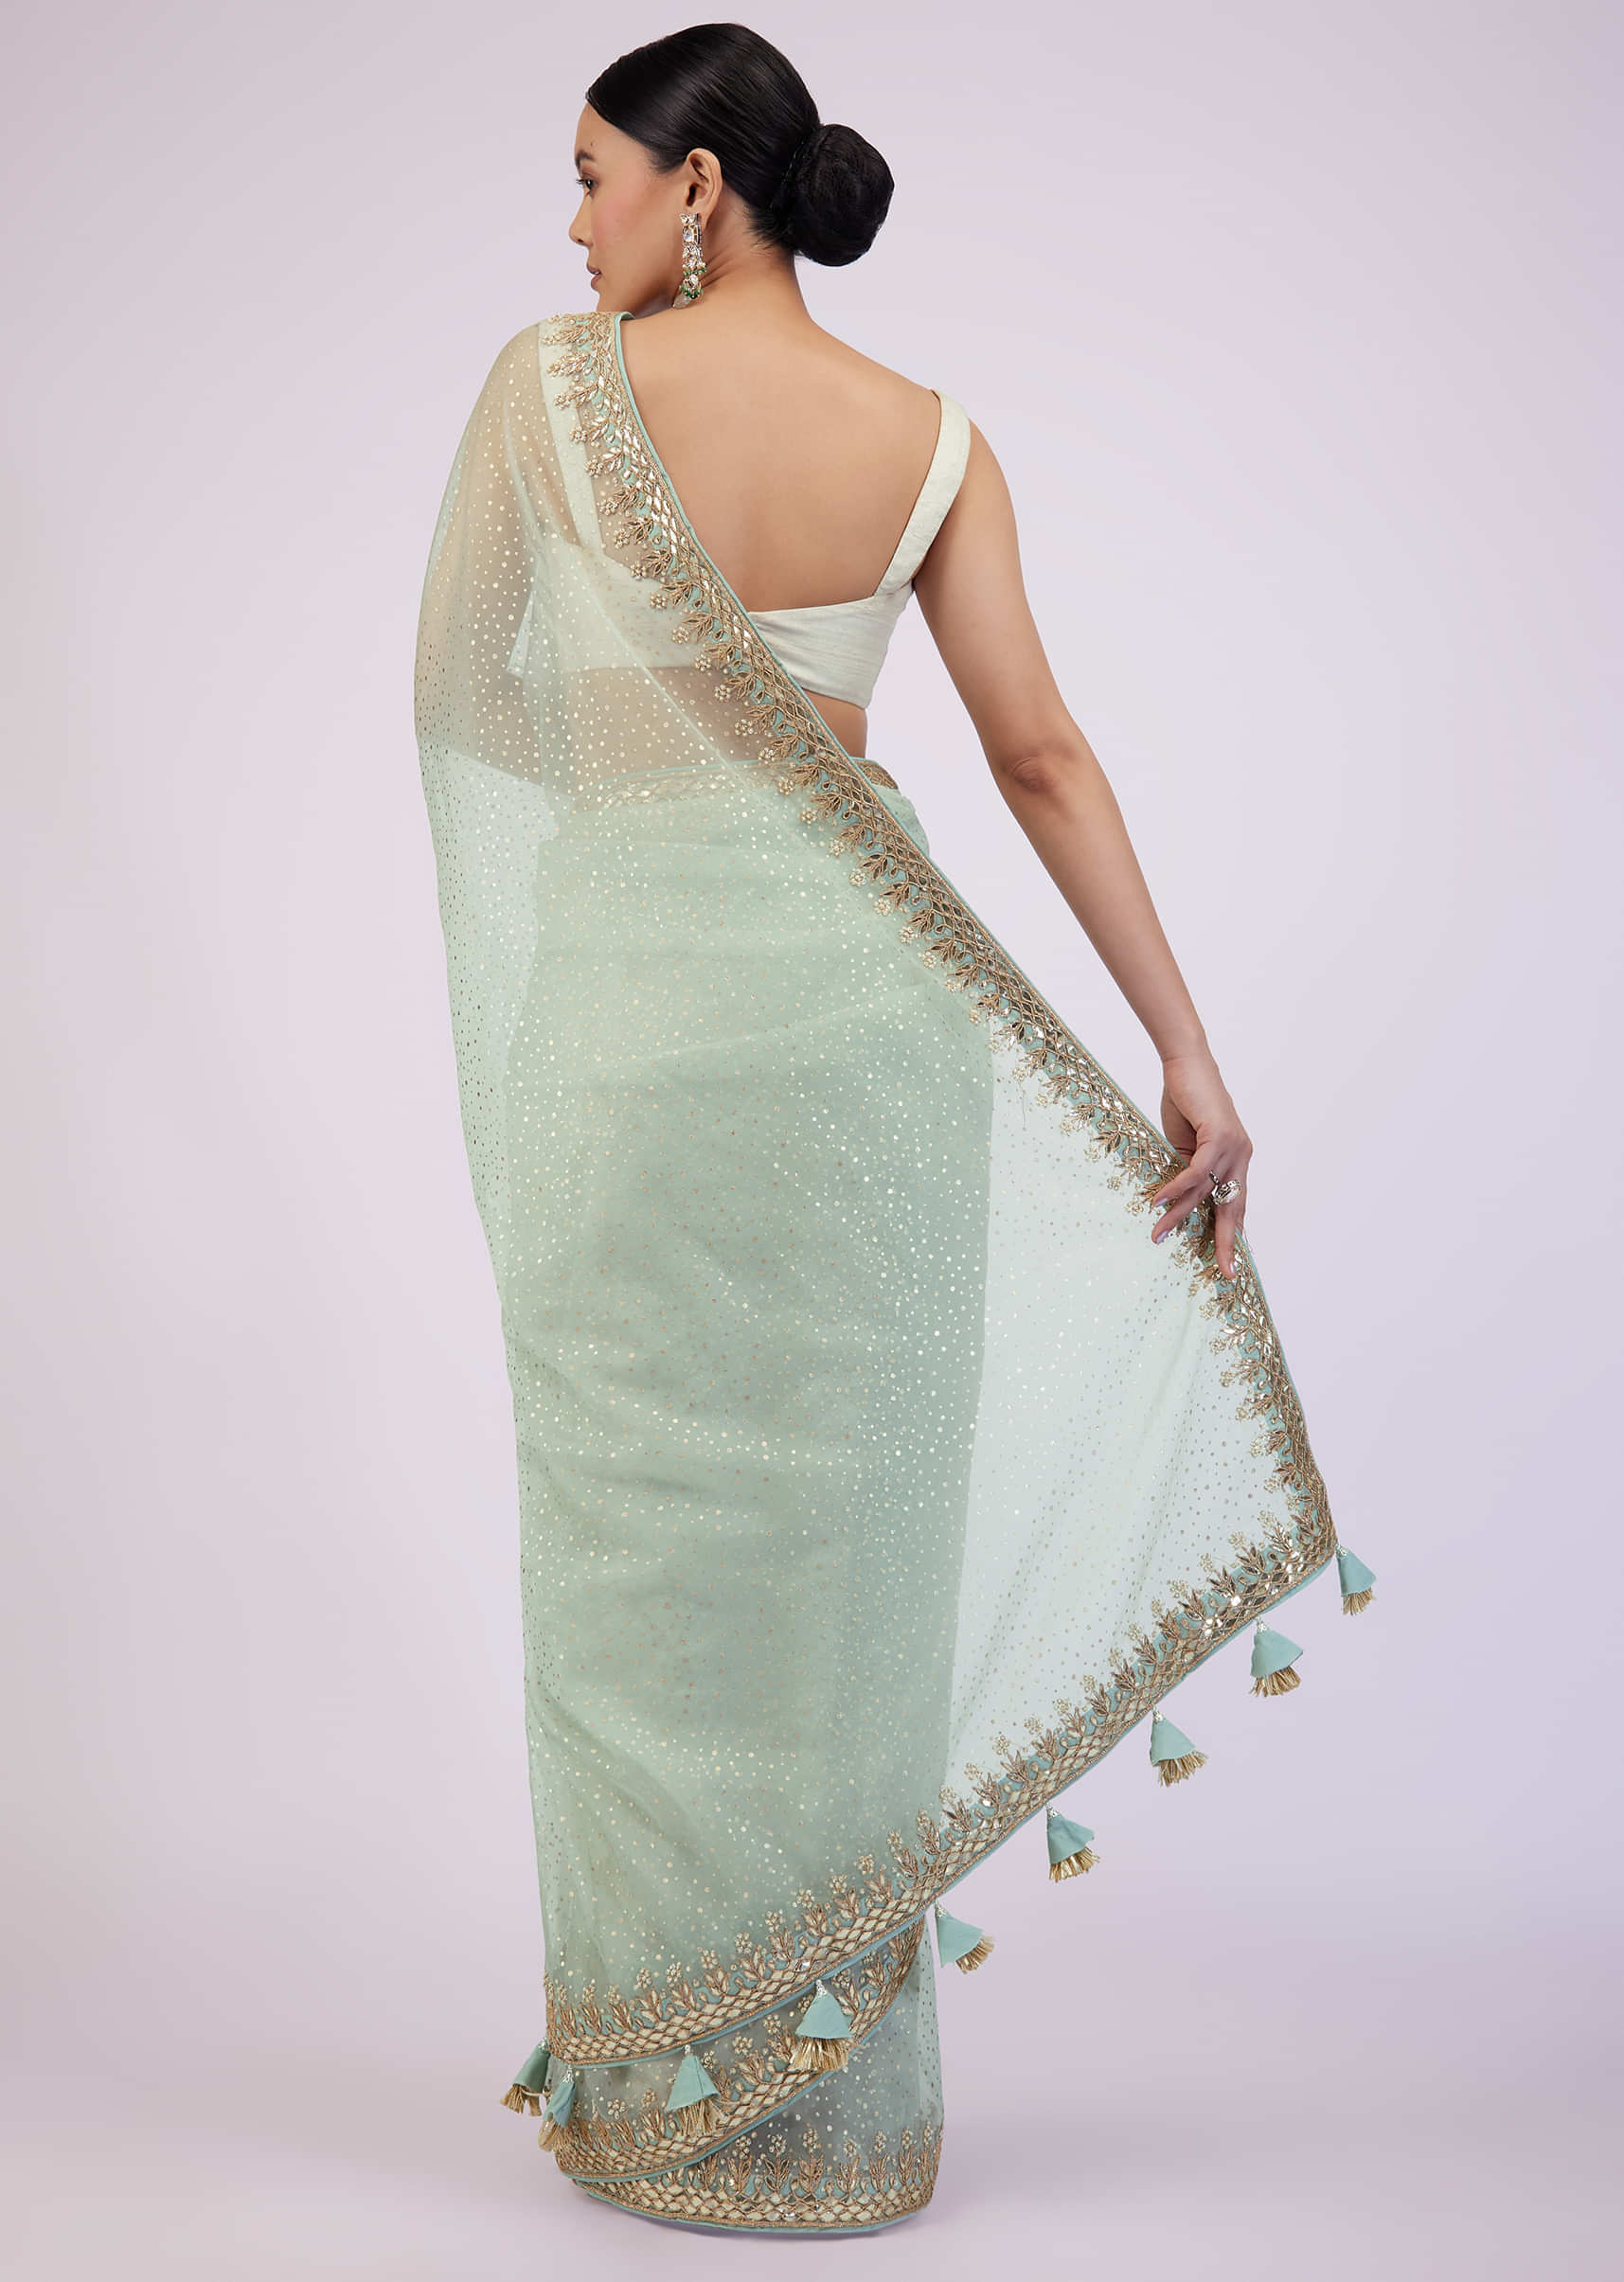 Frost White Saree In Organza With Foil Print And Embroidery